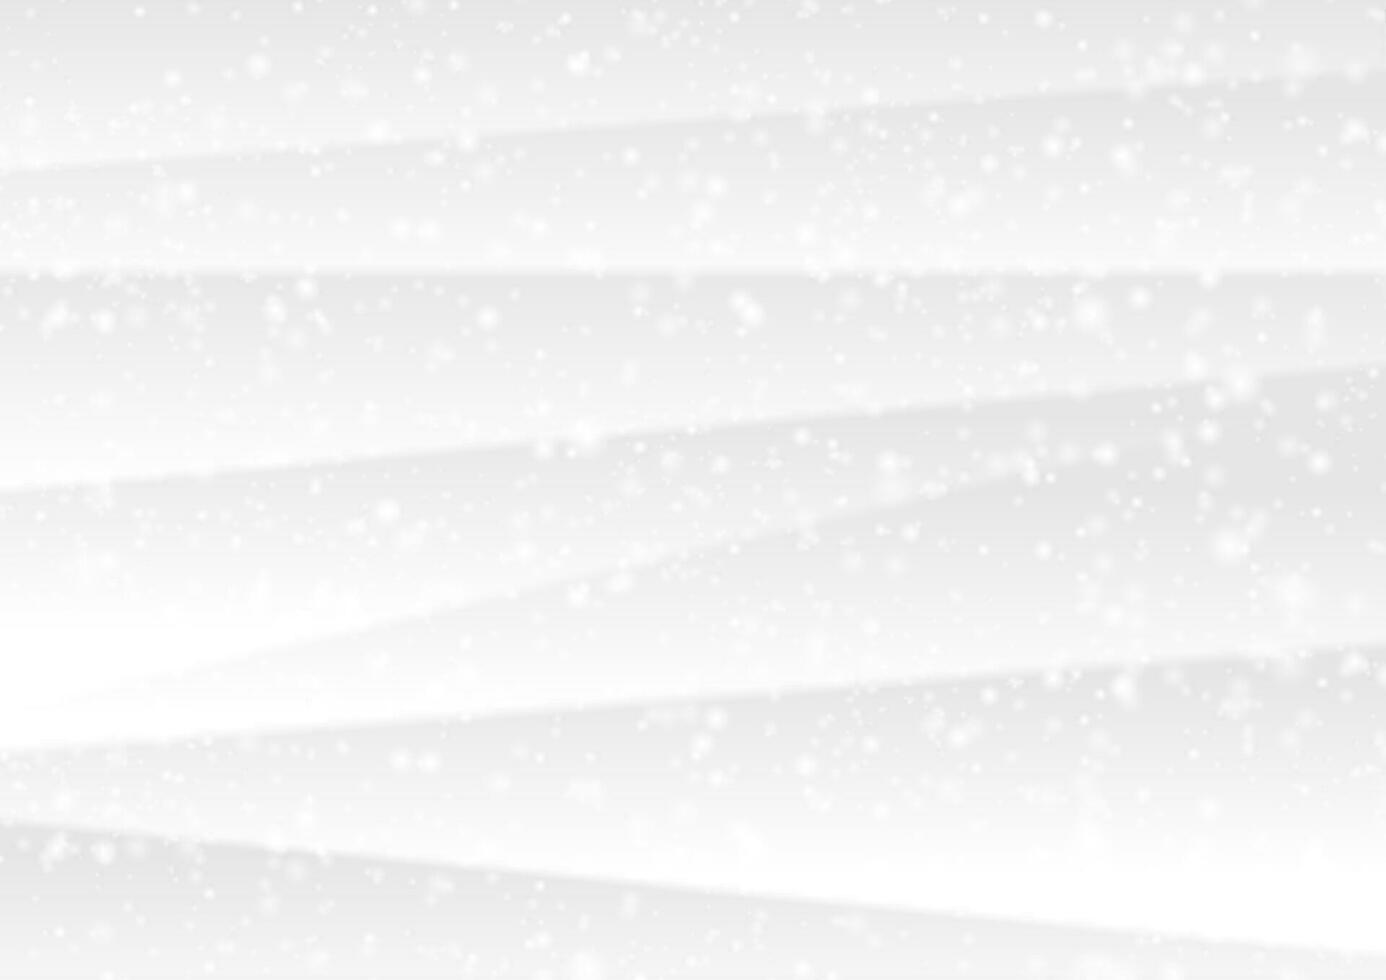 White winter Christmas snow abstract background vector